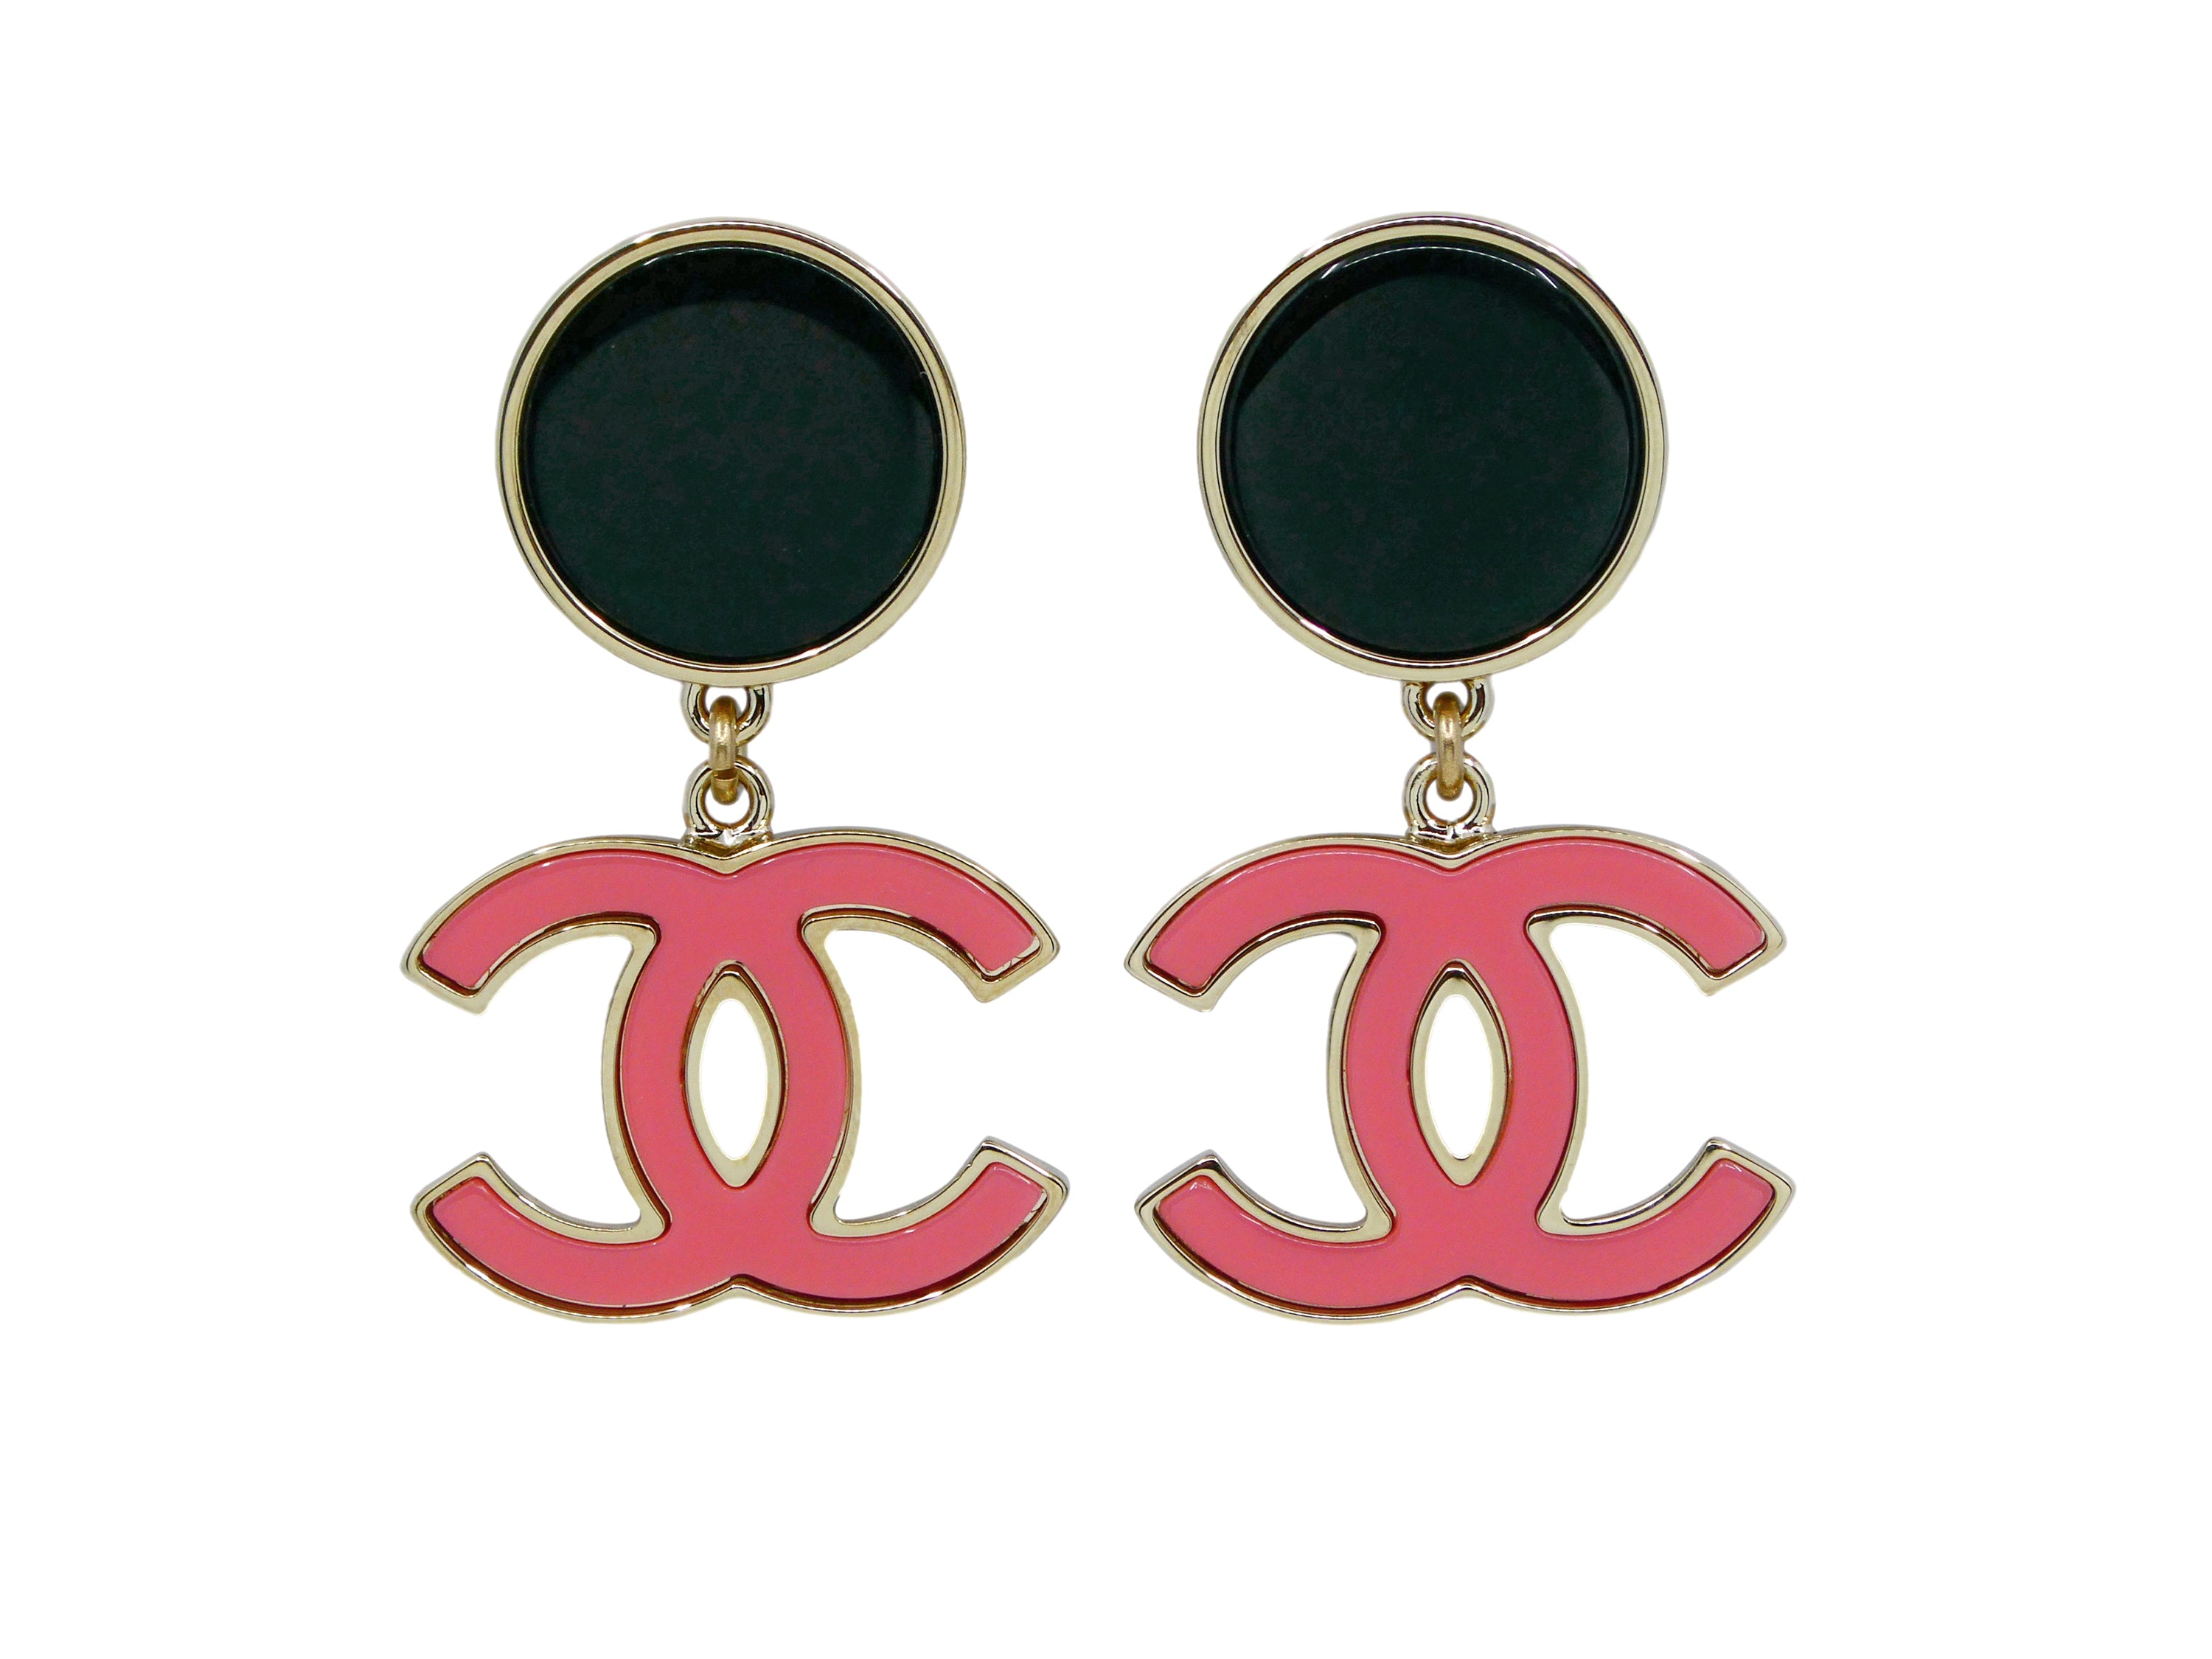 Chanel Pink CC Enamel Earrings  Rent Chanel jewelry for $55/month